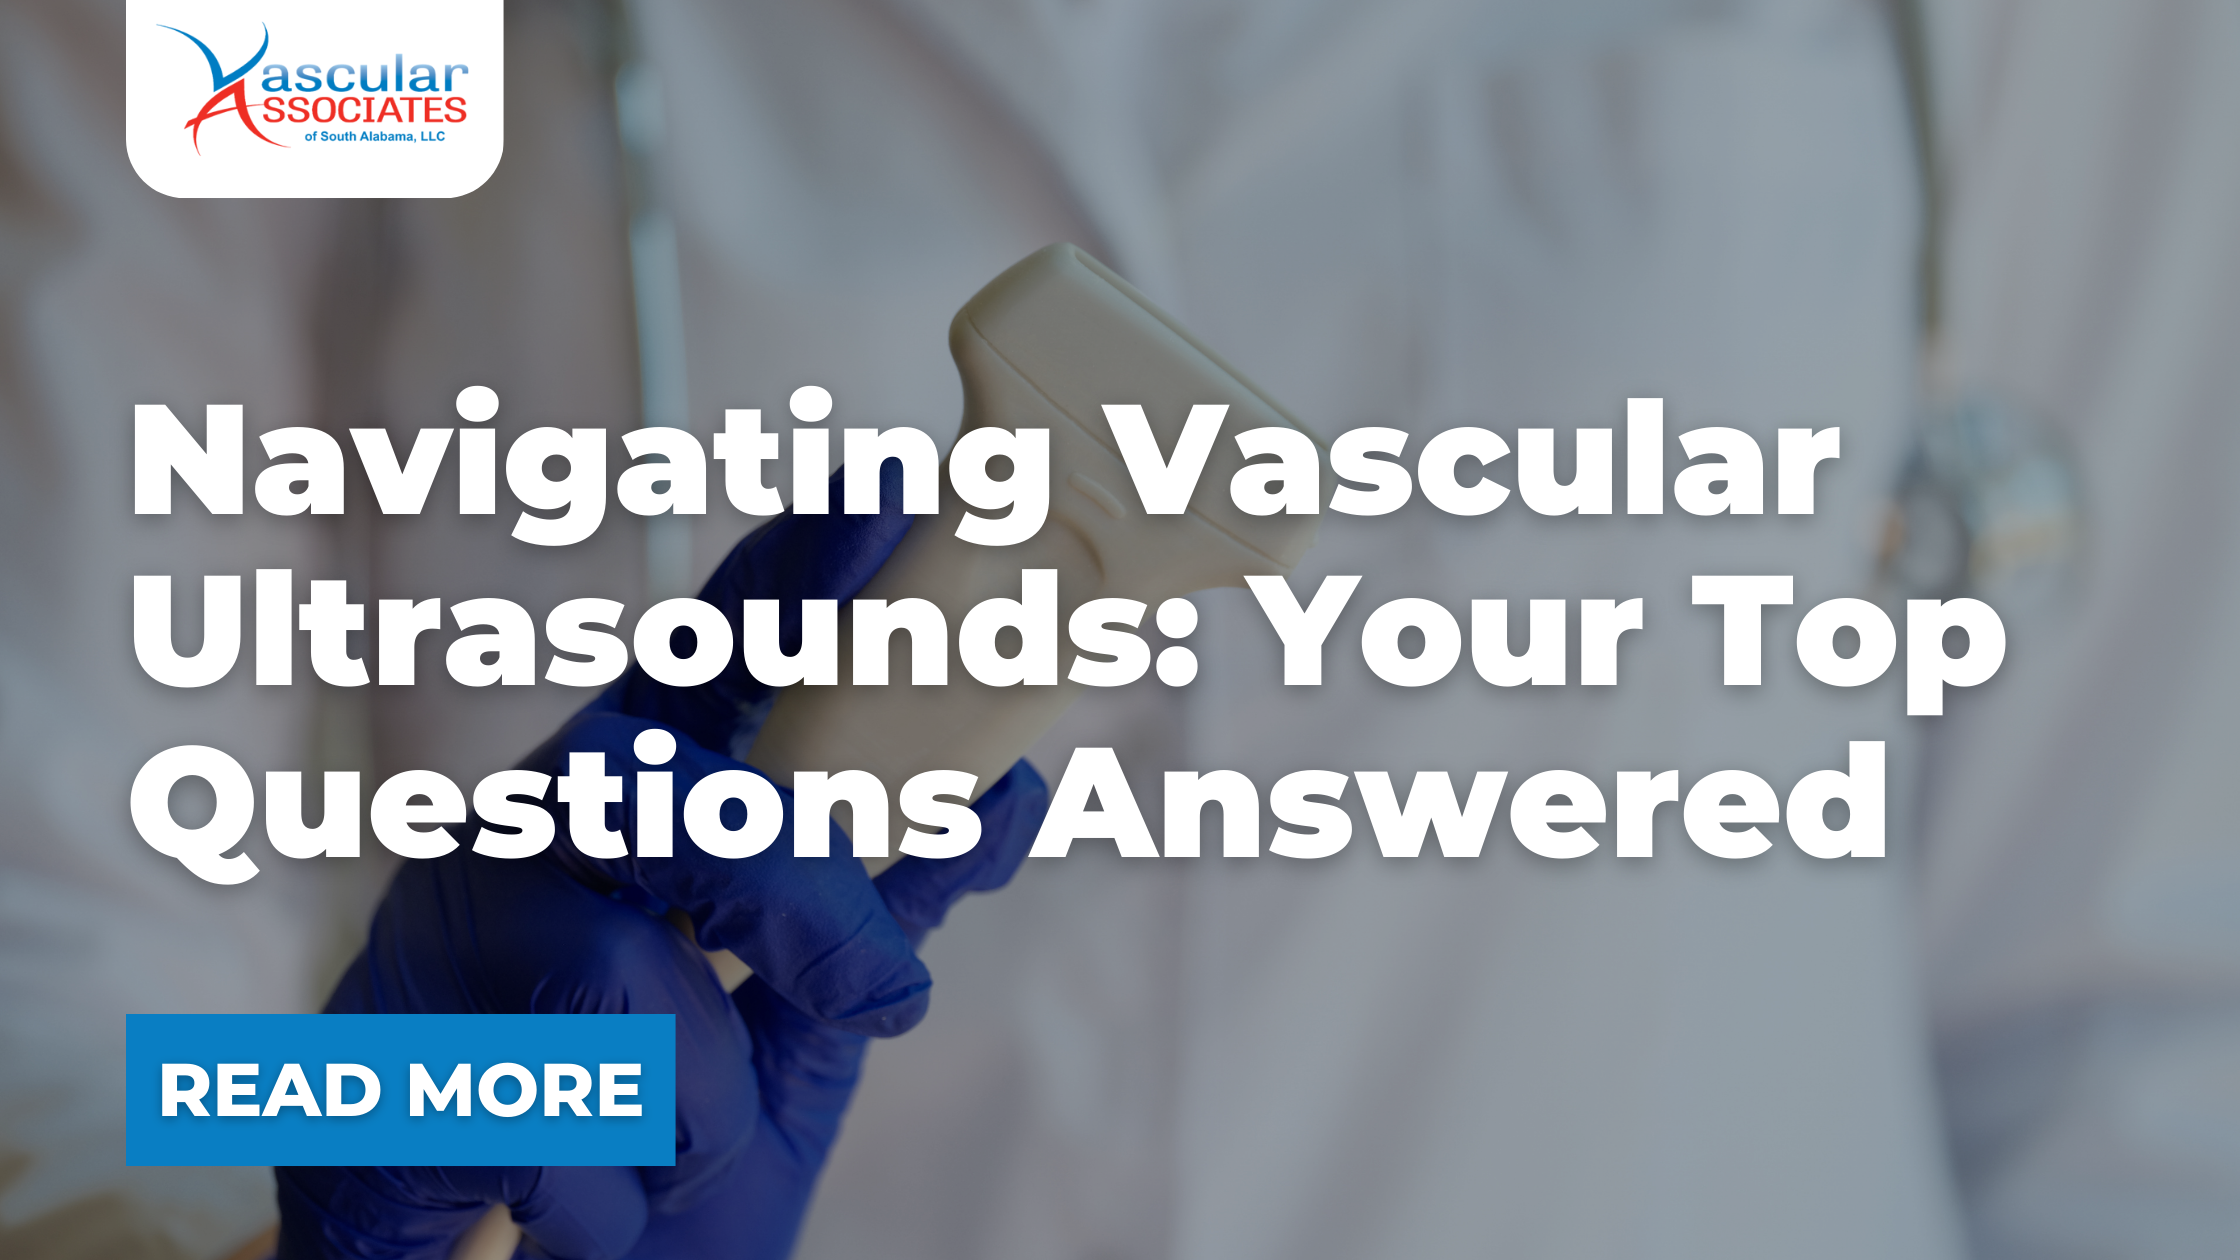 Vascular Blog - Navigating Vascular Ultrasounds Your Top Questions Answered.png